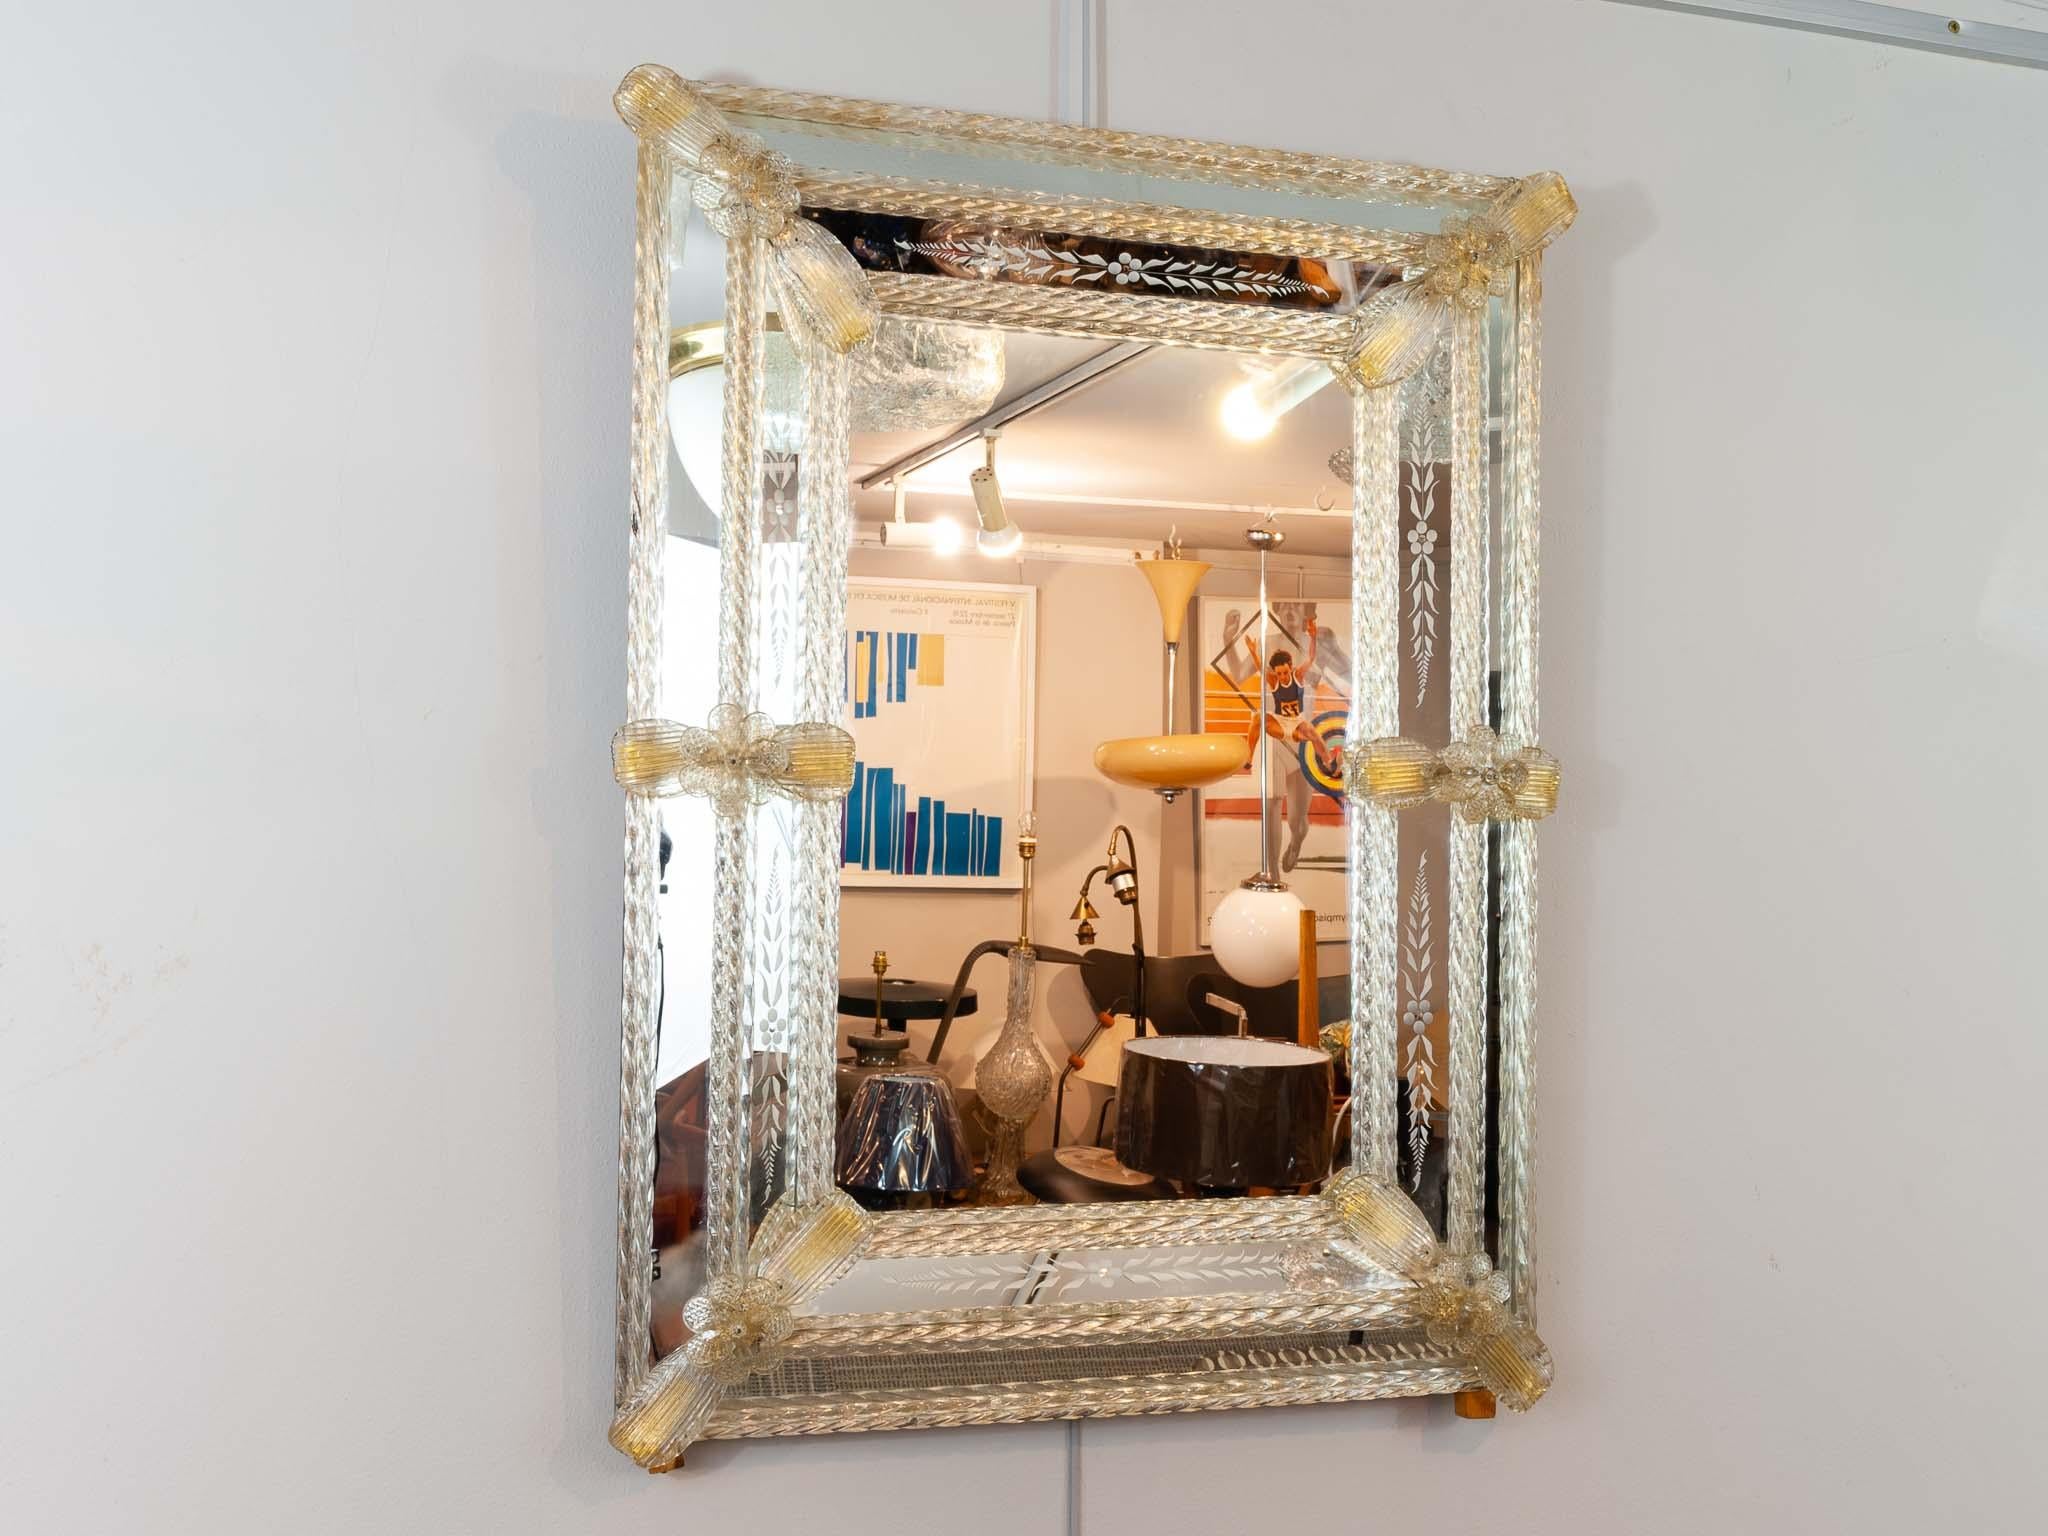 An Italian Venetian mirrored glass wall mirror with reversed etched panels, glass flowers and finely twisted glass rods over subtle gold foil. Perfect for a small dressing or powder room. A beautifully made an intricate mirror.

Dimensions: Depth